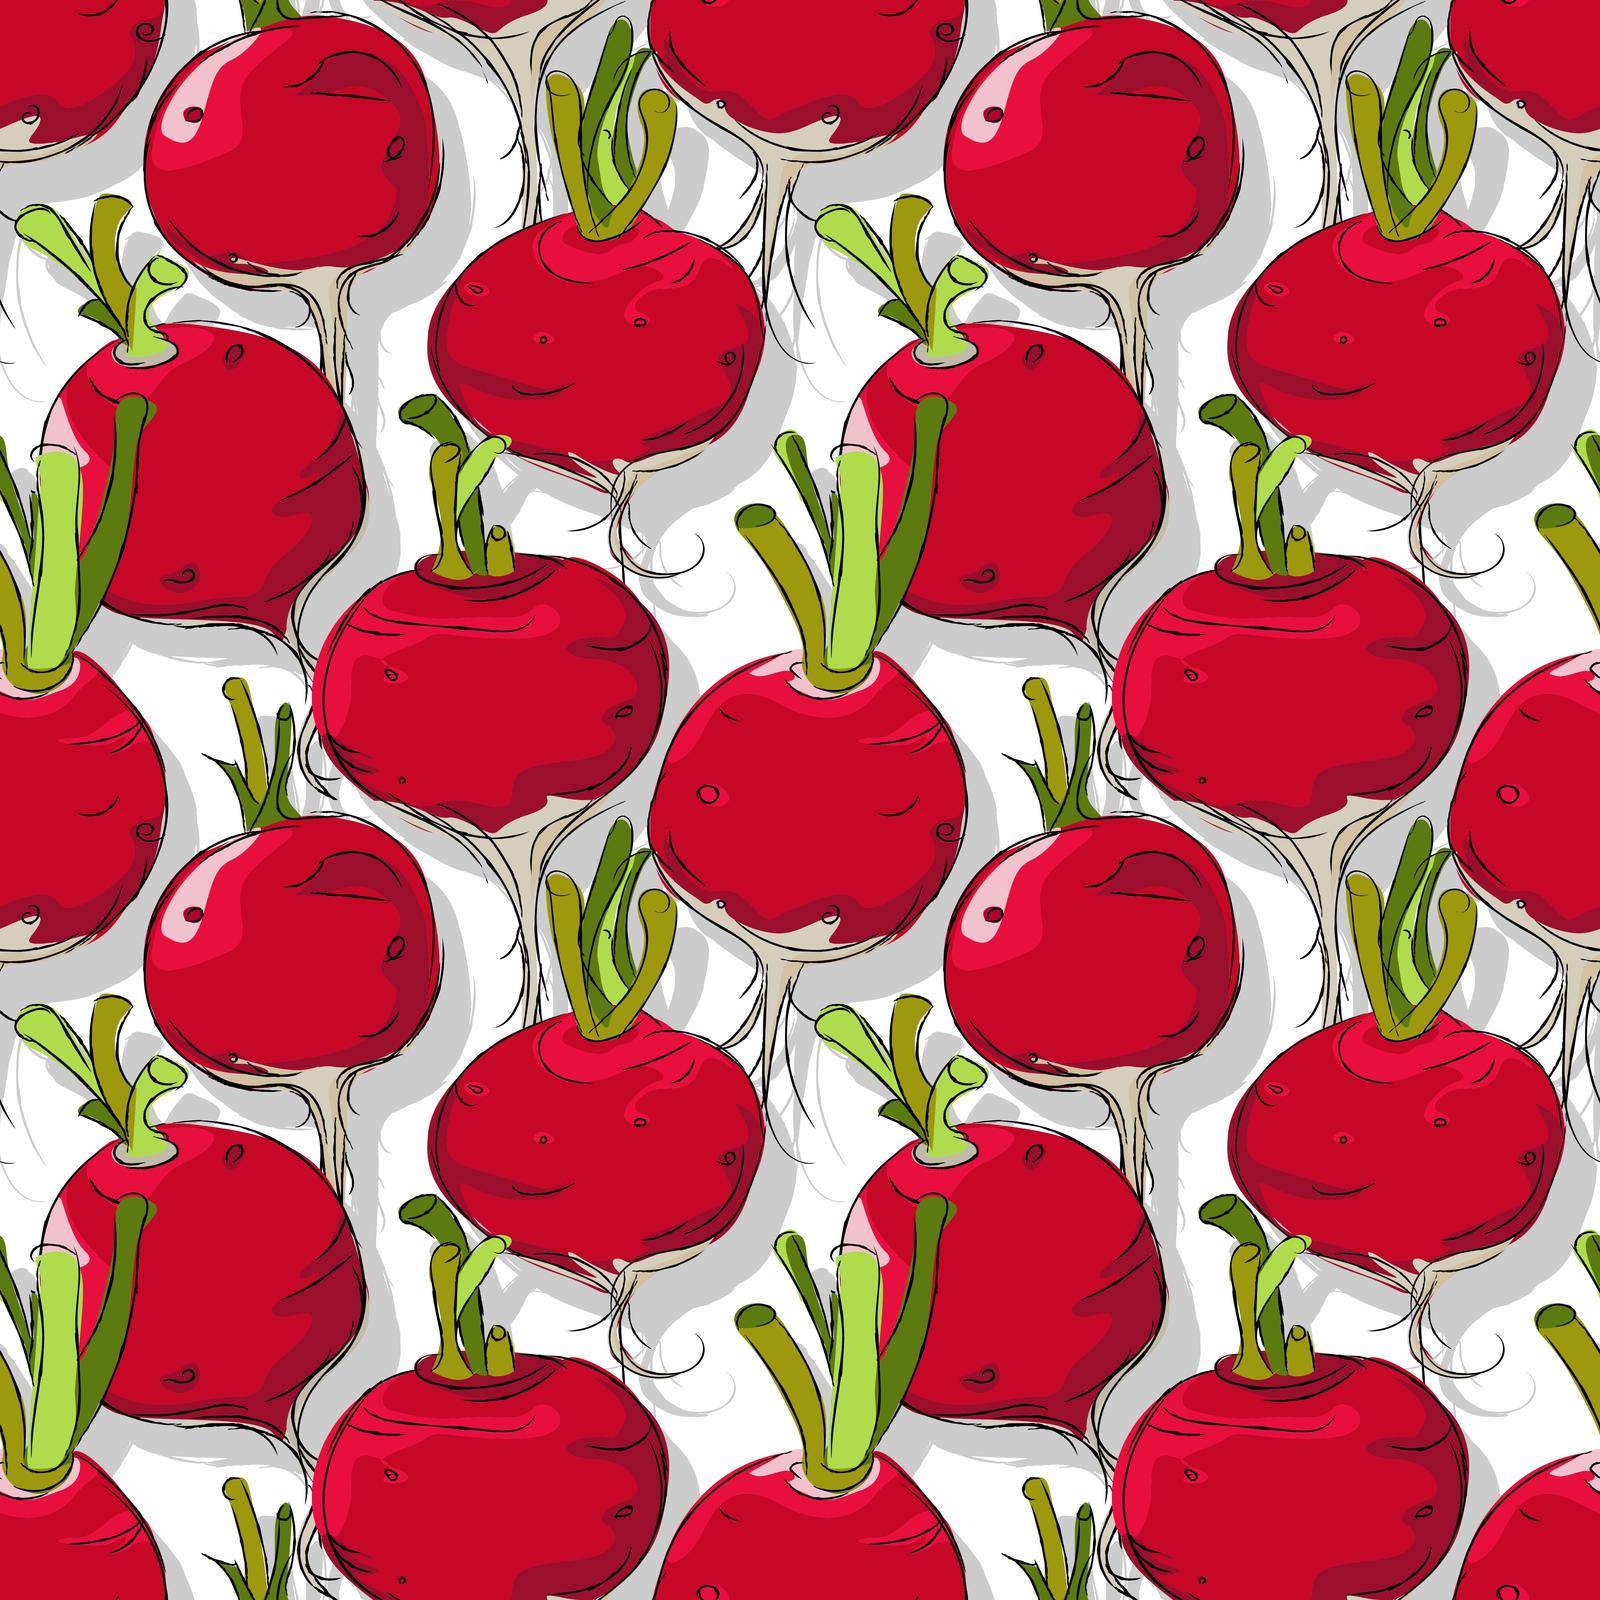 Radishes repeating pattern by Lirch